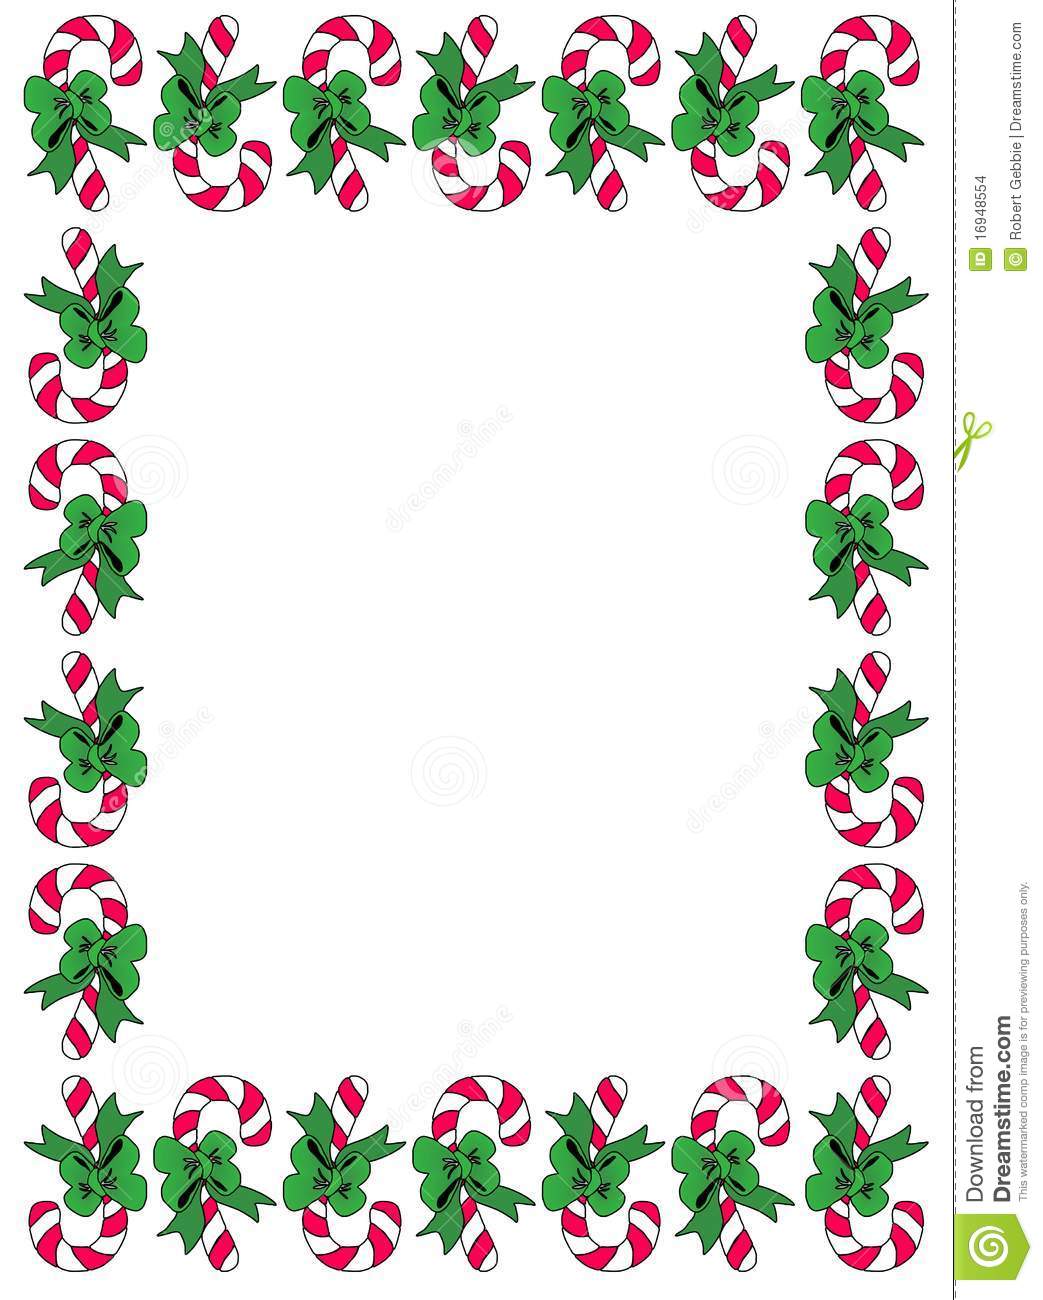 Peppermint Candy Cane Border